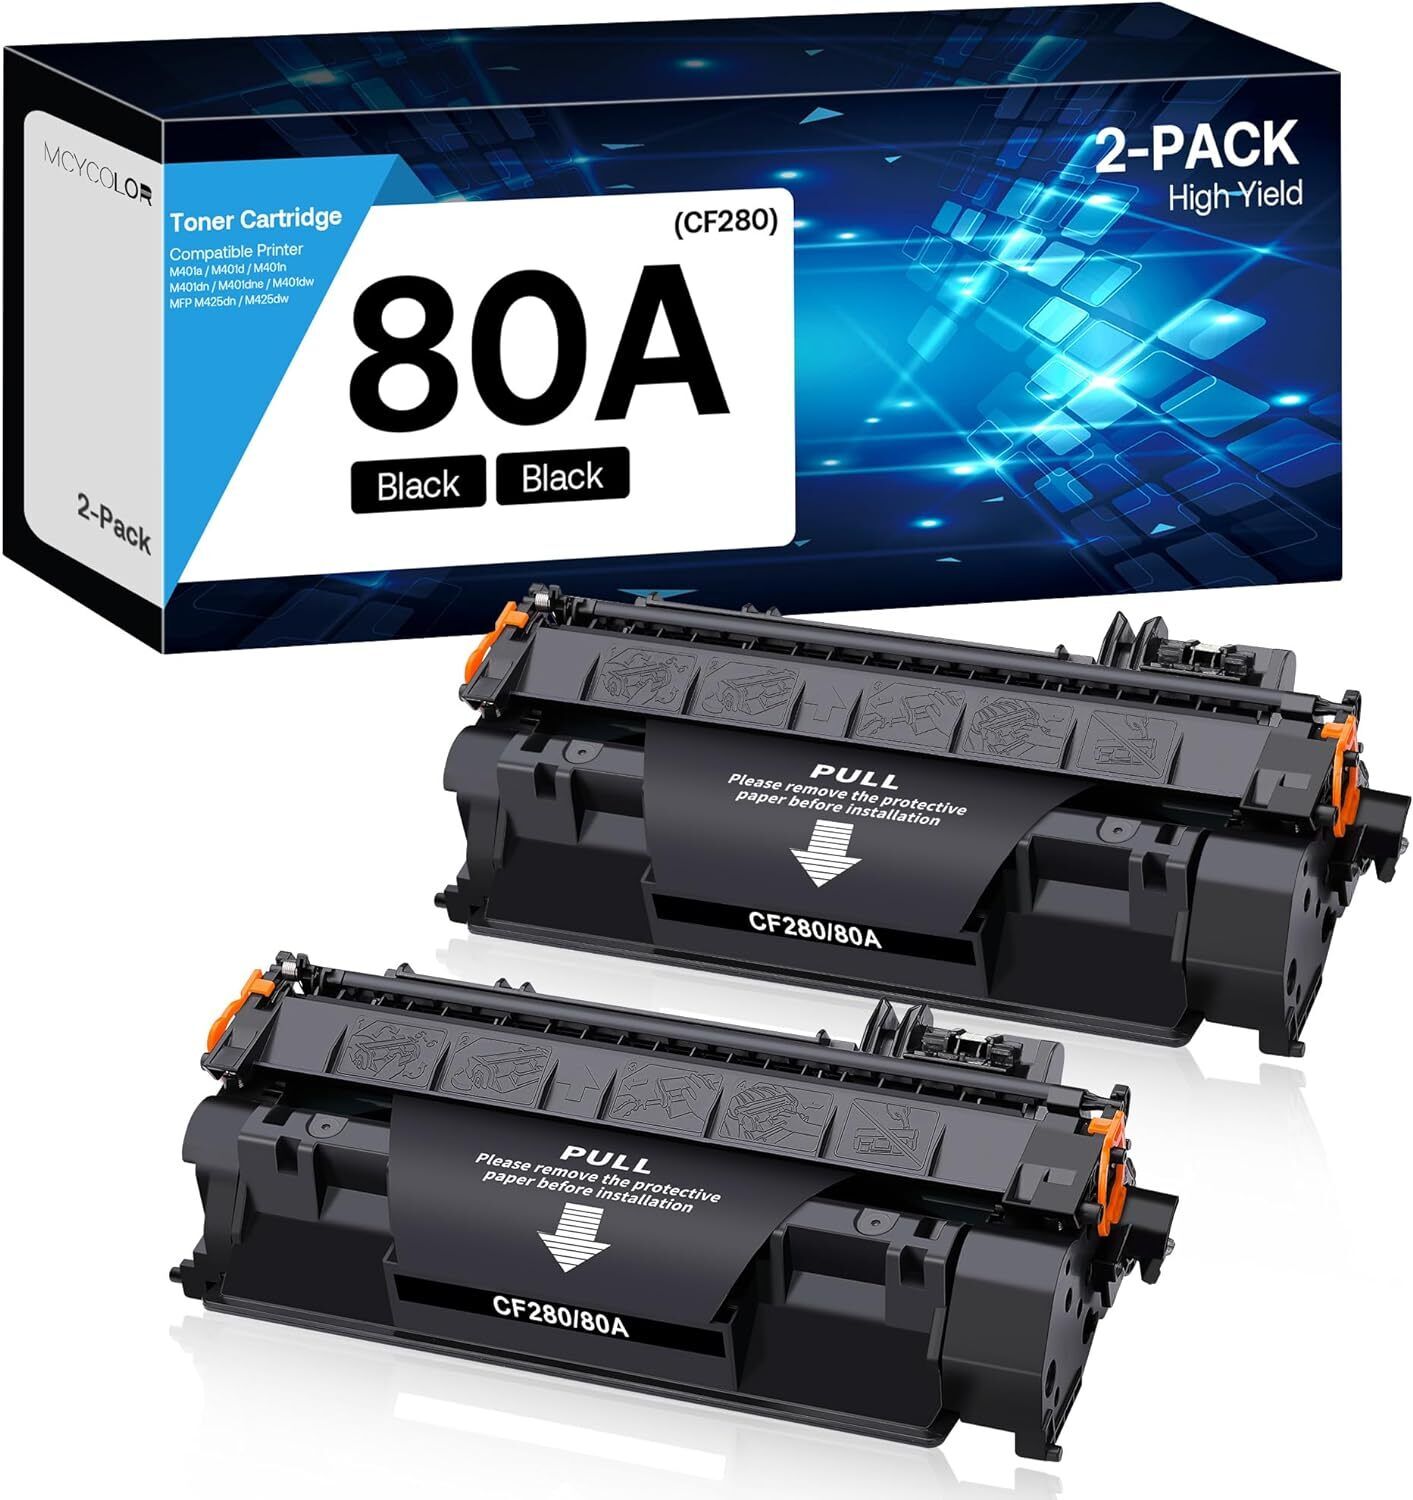 80A Toner Cartridge Black High Yield Compatible for HP Pro 400 M410 M401D